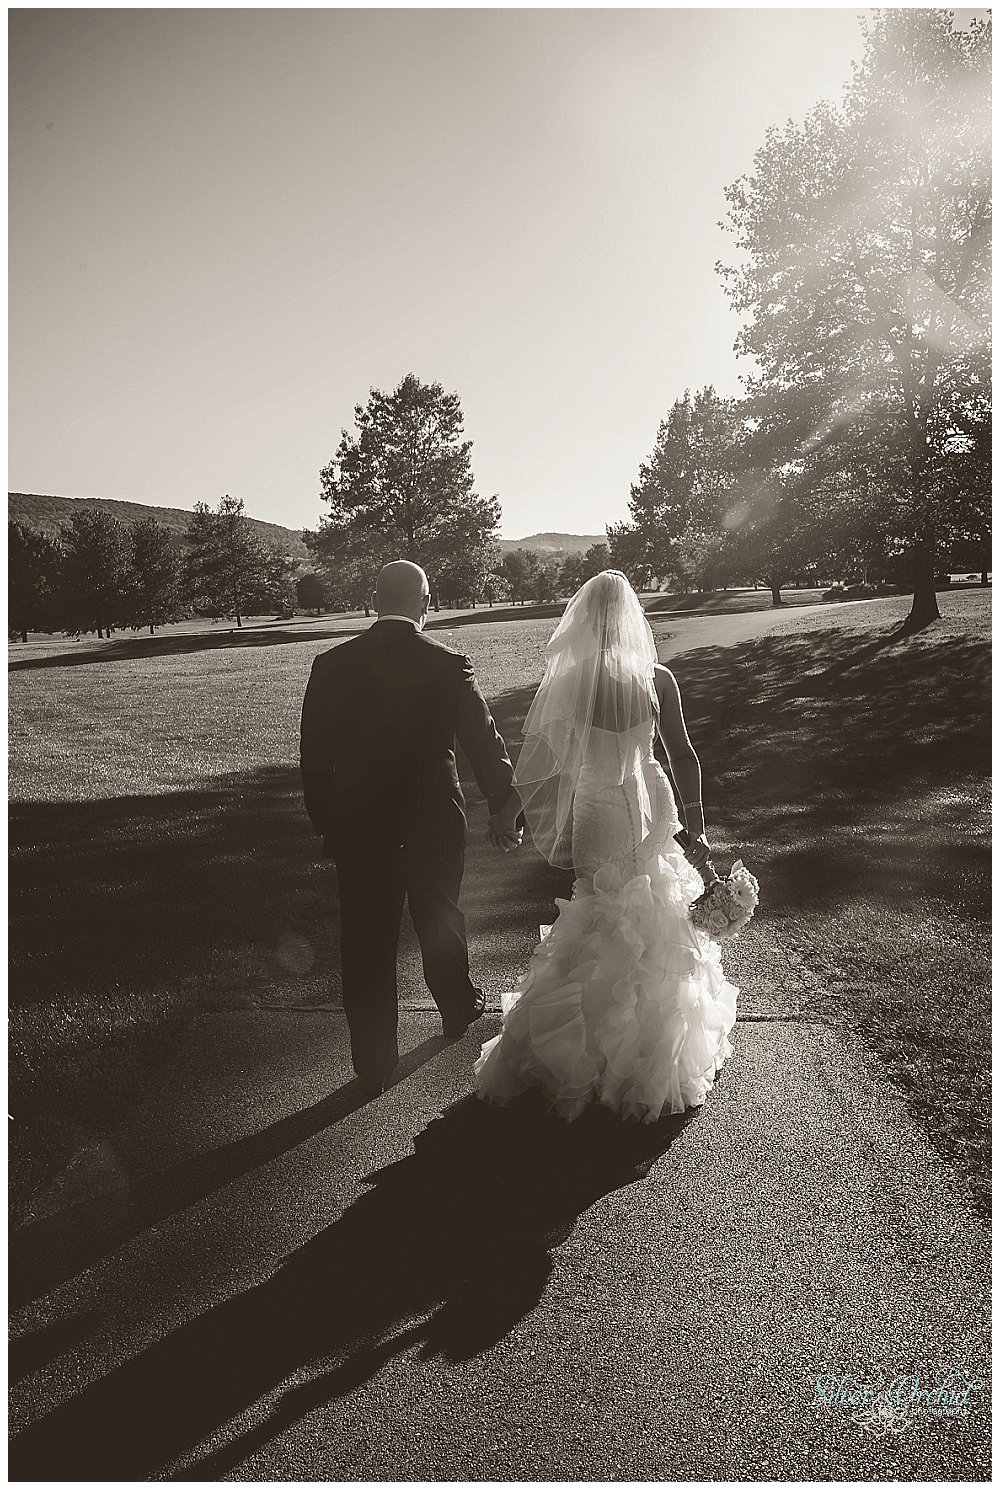 ©Silver Orchid Photography_wedding photography_CantandoBrooksideMacungie_silverorchidphotography.com_0096.jpg